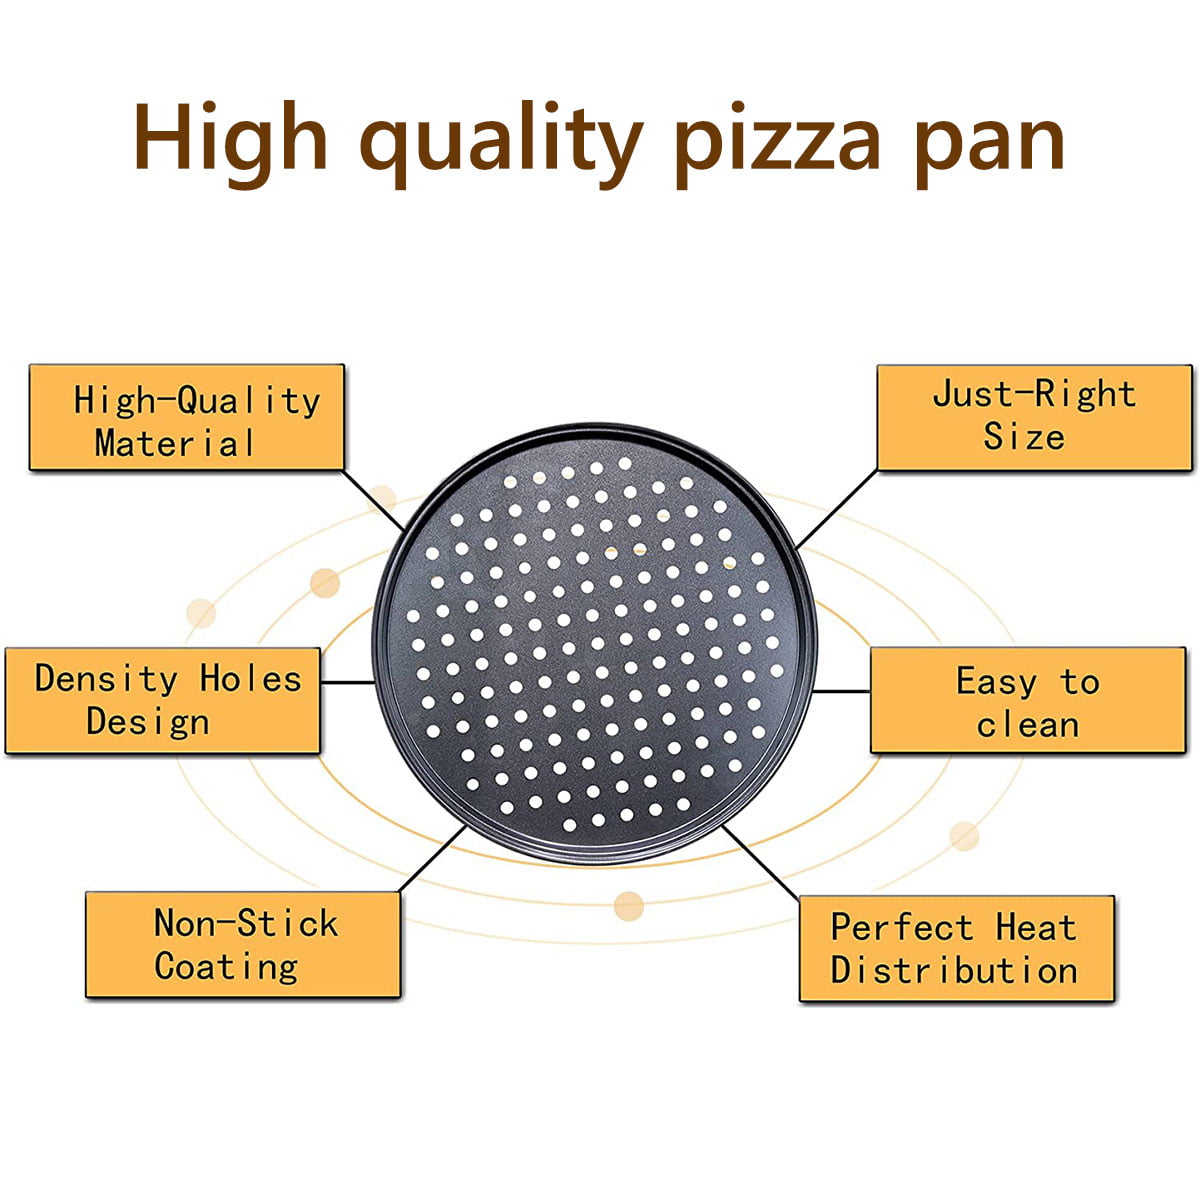  Beasea Pizza Pans with Holes, 8.5 Inch Food Network Pizza Pan  Heavy Duty Aluminum Alloy Round Pizza Tray Perforated Pizza Crisper Pan  Pizza Baking Tray Bakeware for Home Restaurant Kitchen Air